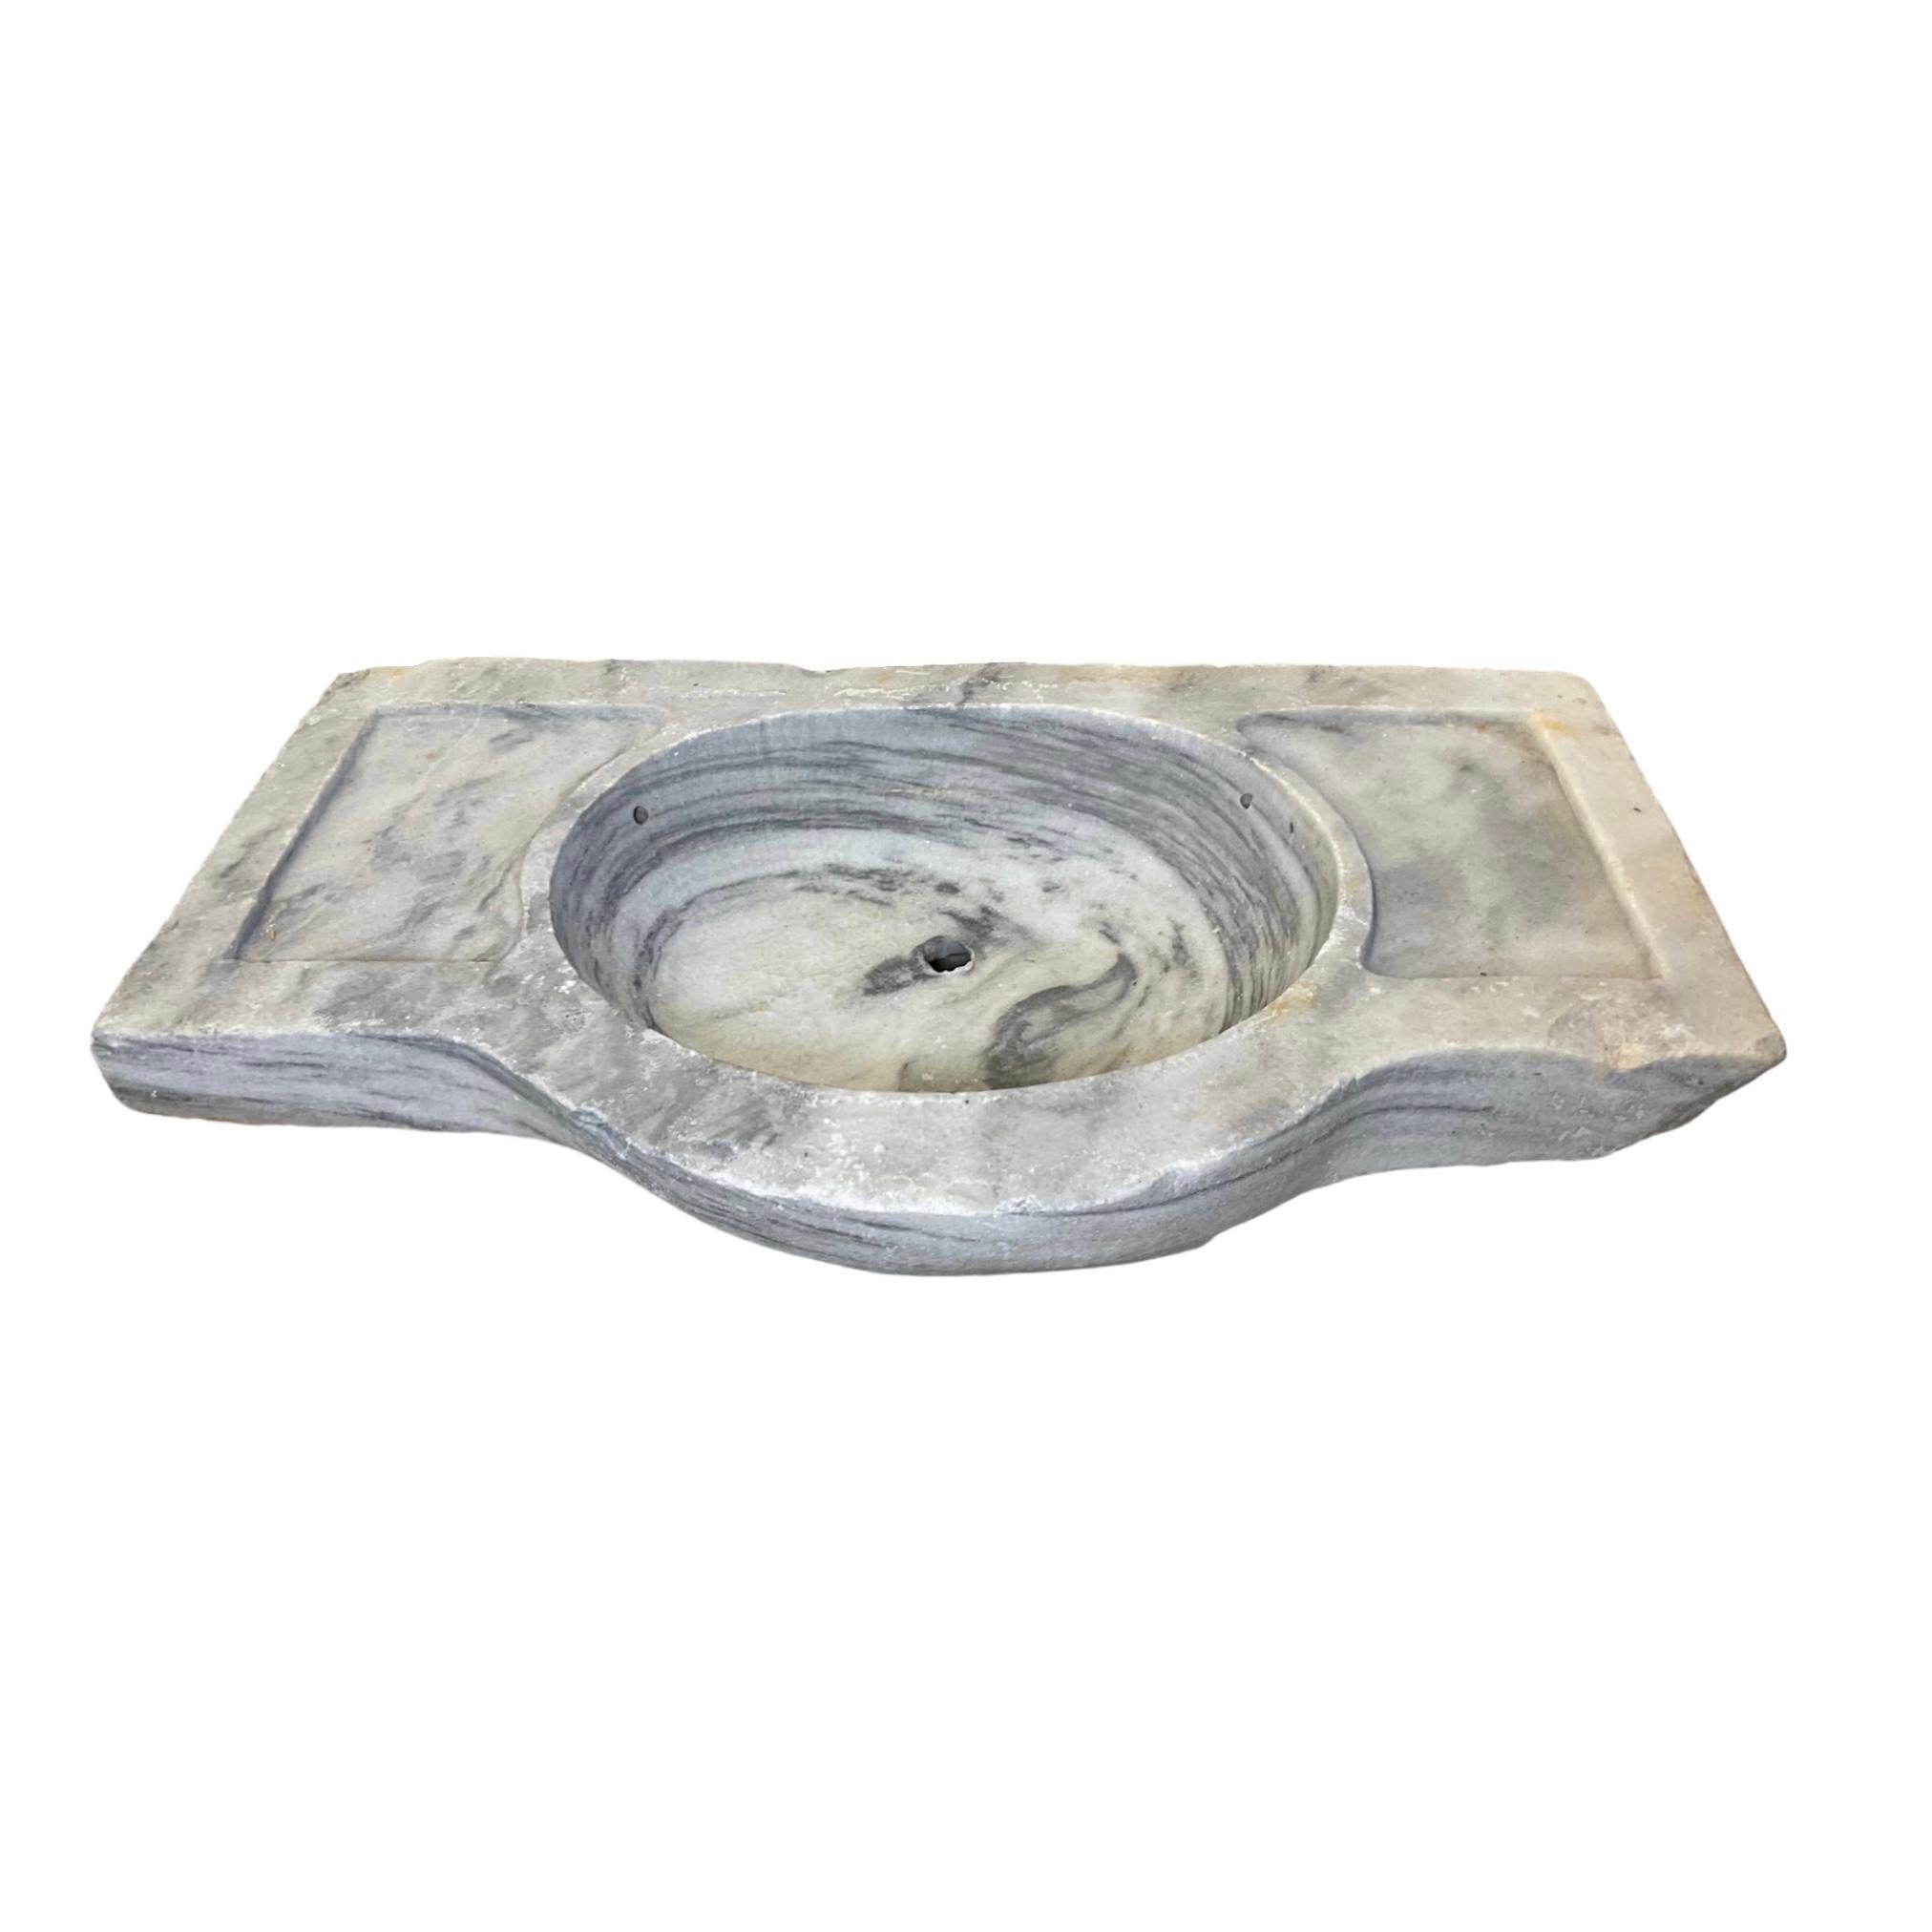 Our French white marble sink is a timeless piece of luxury, featuring a traditional 18th century design that guarantees unrivalled elegance and durability. Crafted from rare and beautiful white marble, it is sure to add a touch of sophistication to